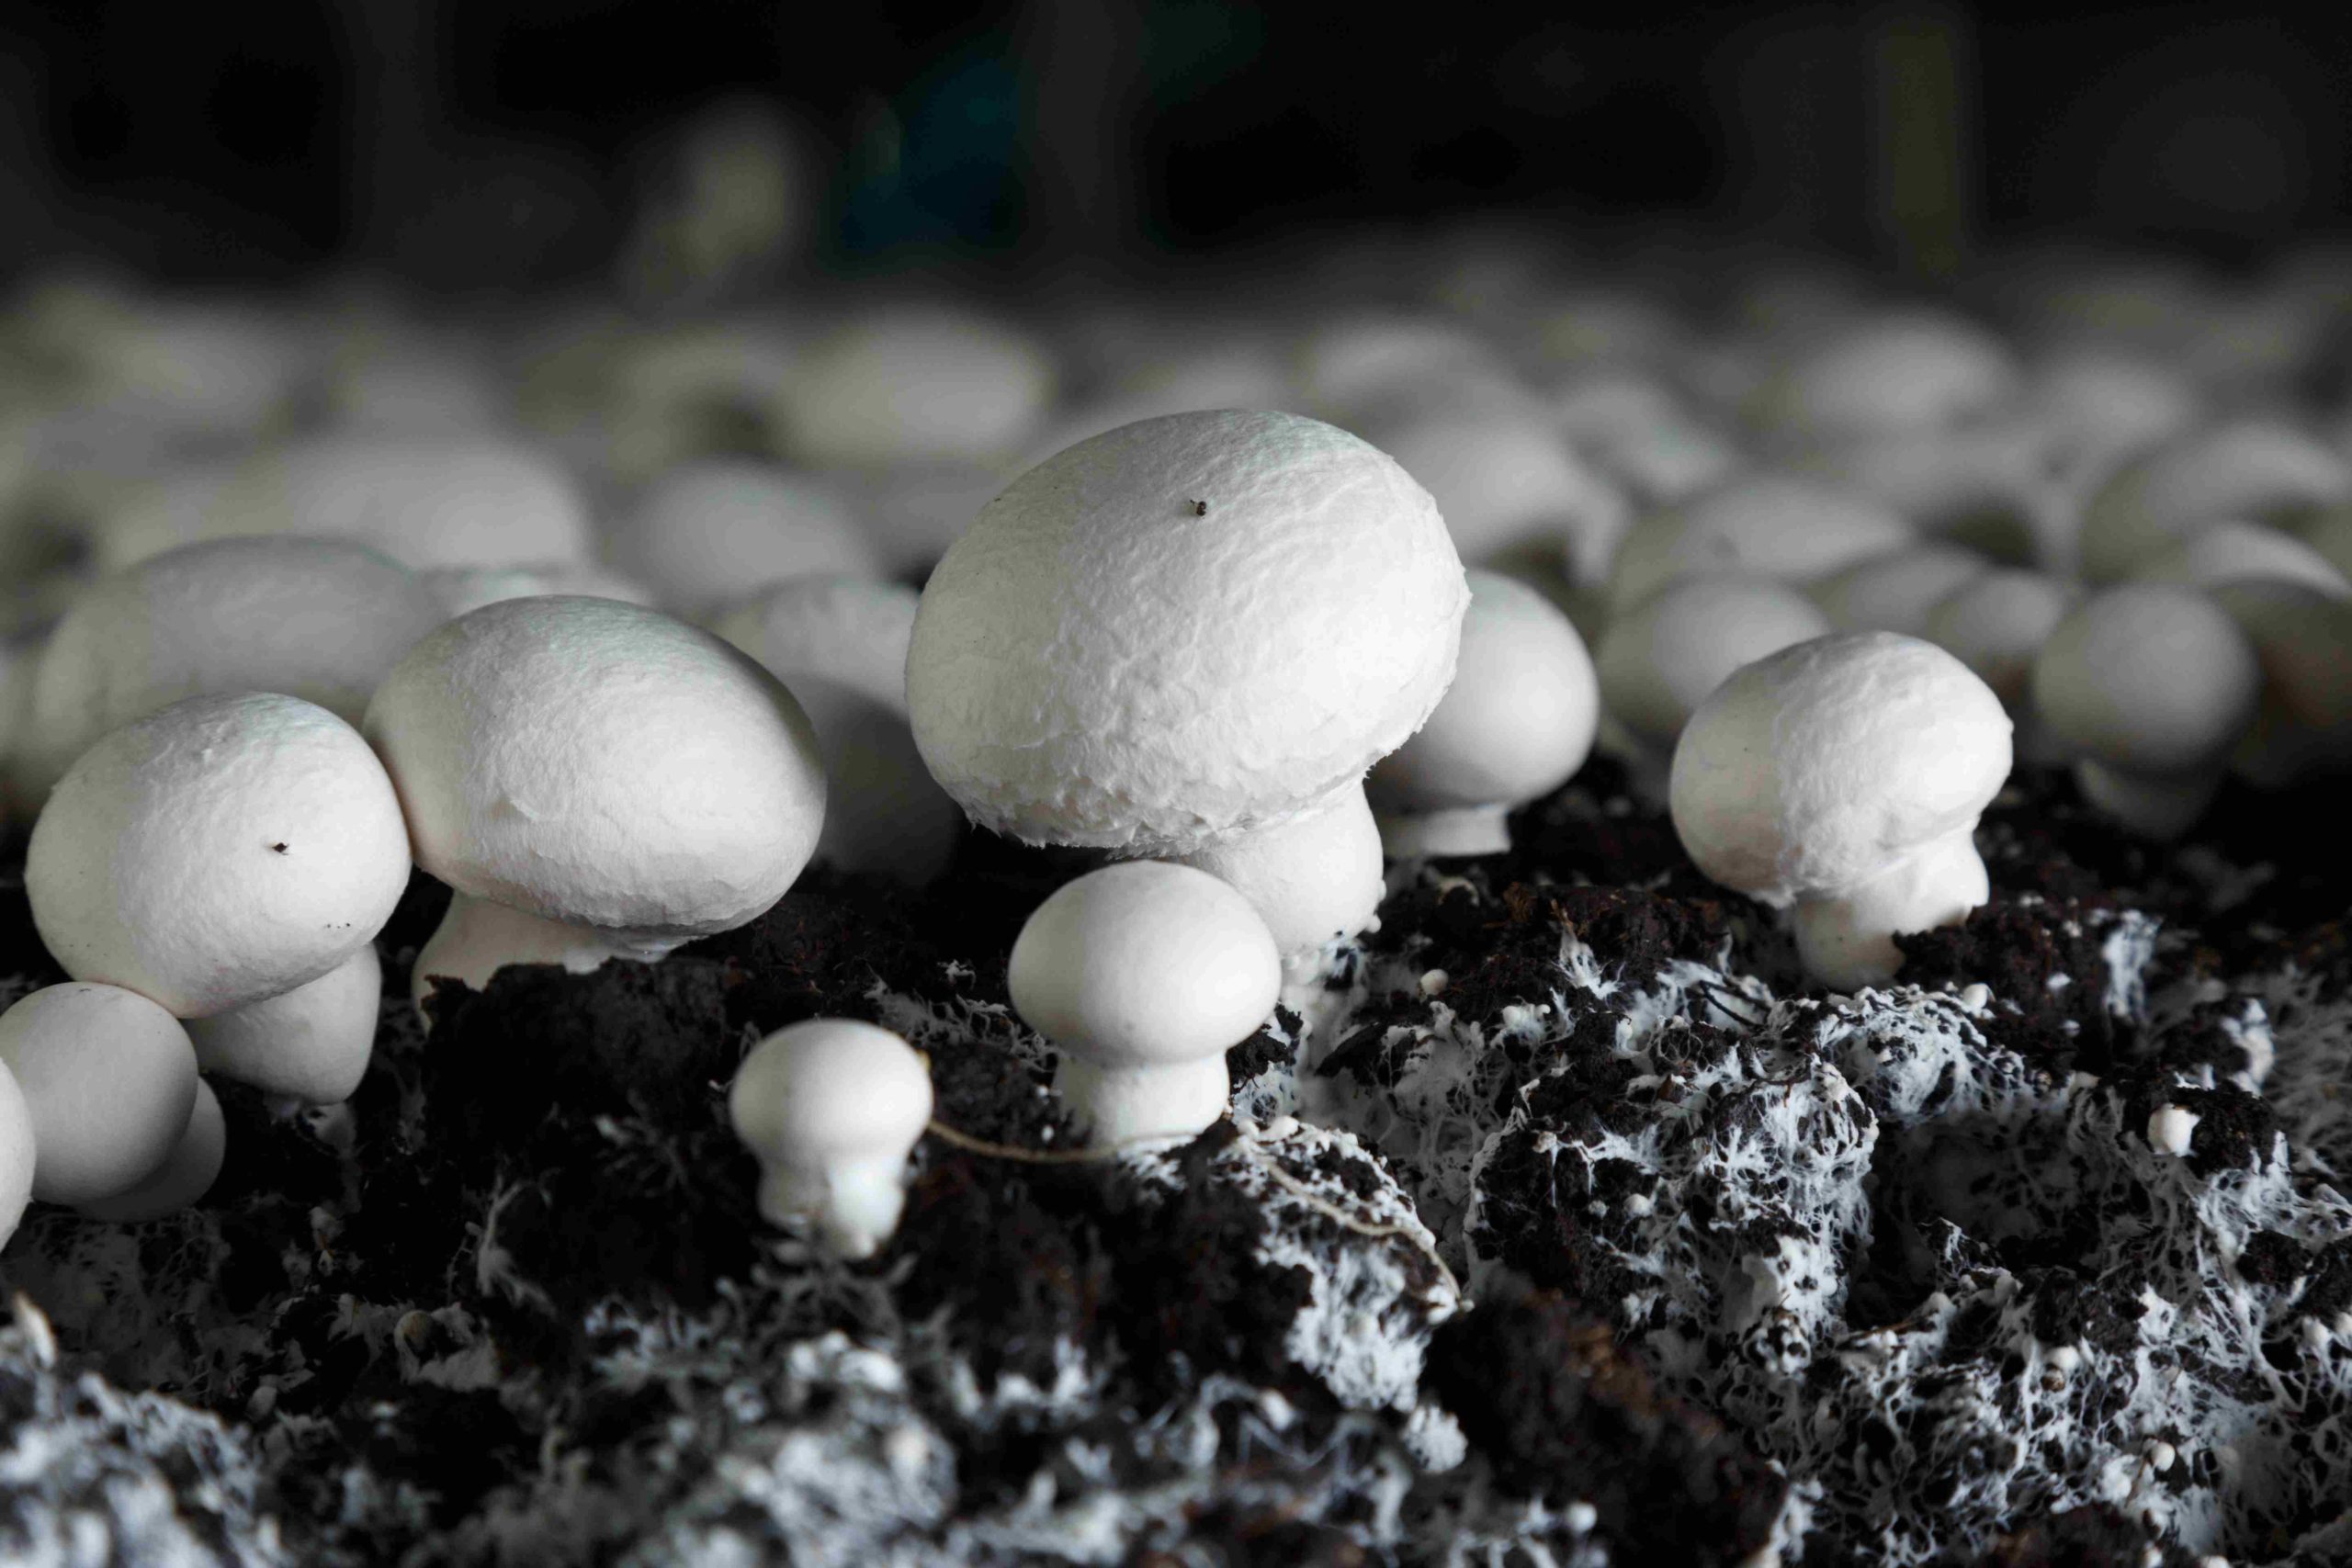 What Are Button Mushrooms?